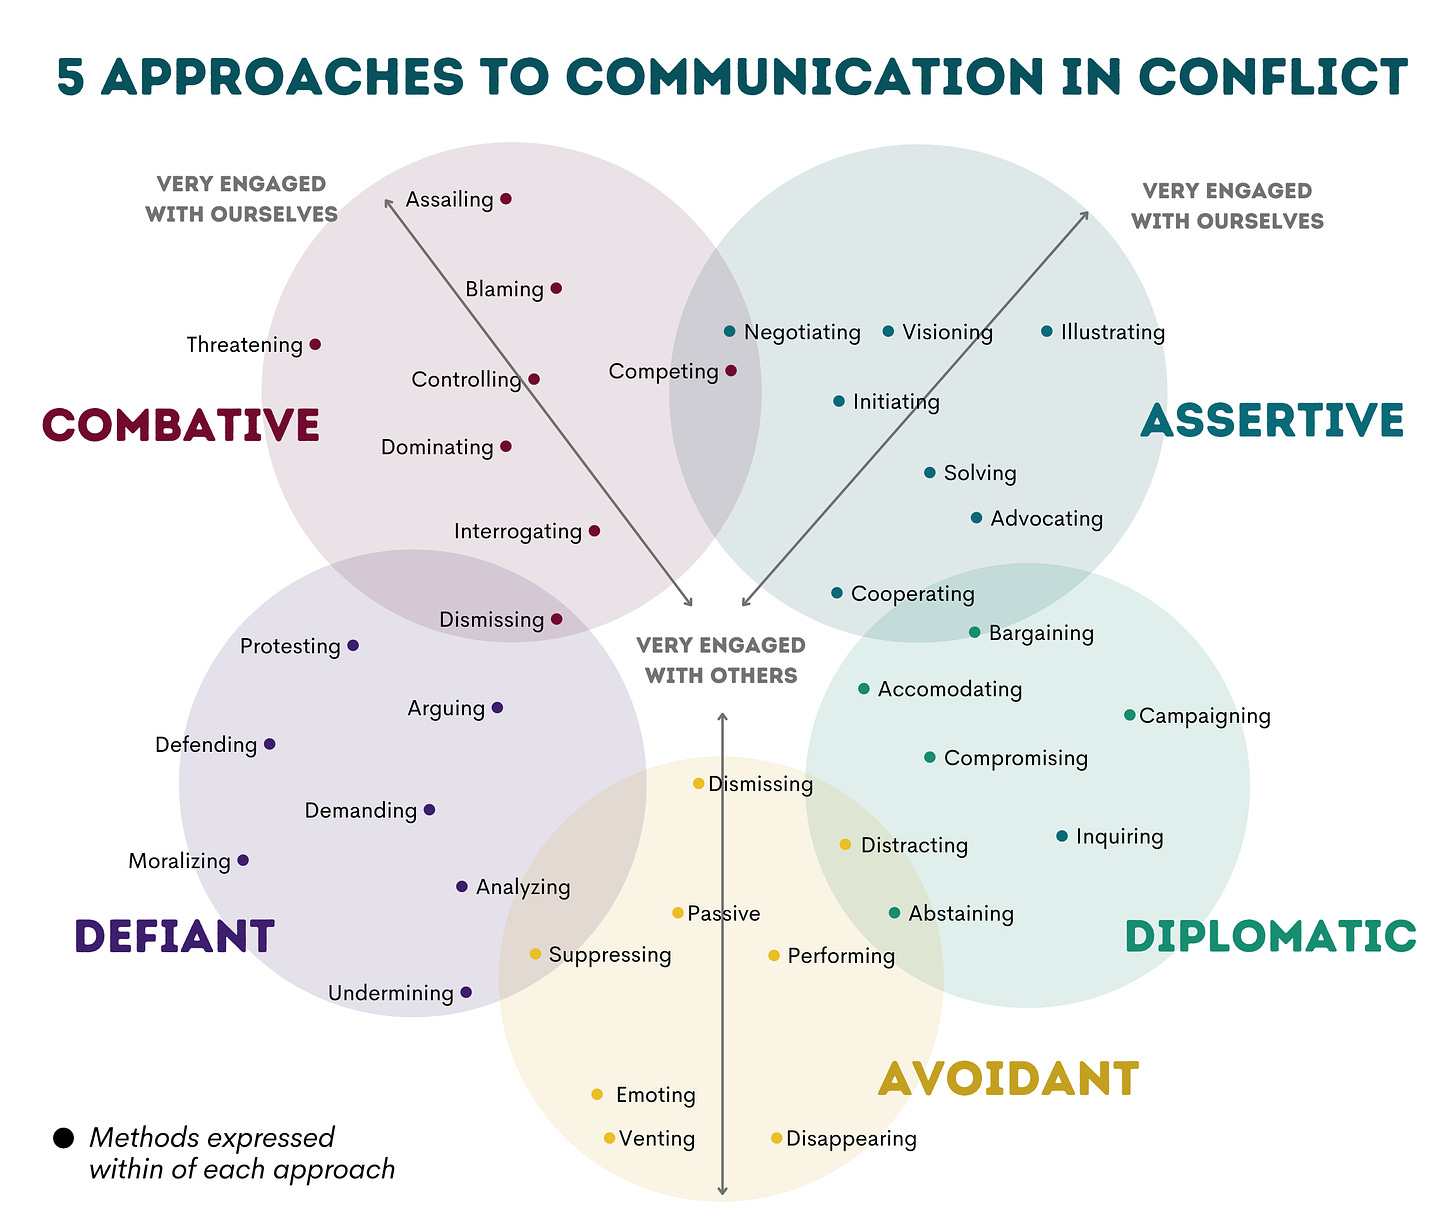 Image Description: The top of the image says “5 Approaches to Communication in Conflict” Five circles that represent the approaches are arranged in a circular pattern, so that two of their edges overlap with nearby circles; each circle contains a map of different methods (behaviors) that correspond to that approach. Methods close to the center indicate those which are very engaged with others, while those toward the outside indicate those which are very engaged with ourselves. The first circle is labeled “Assertive” and inside, in order of center-outward are: Cooperating, Advocating, Solving, Initiating, Negotiating, Visioning, and Illustrating. The second is “Diplomatic” and inside: Accomodating, Bargaining, Compromising, Campainging, Abstaining, Inquiring. Next is “Avoidant,” inside: Dismissing, Distracting, Passive, Performing, Suppressing, Emoting, Venting, Disappearing. Next is “Defiant,” inside: Arguing, Protesting, Demanding, Analyzing, Defending, Undermining, Moralizing. Next is “Combative,” Inside: Dismissing, Interrogating, Dominating, Competing, Controlling, Blaming, Assailing, Threatening. 